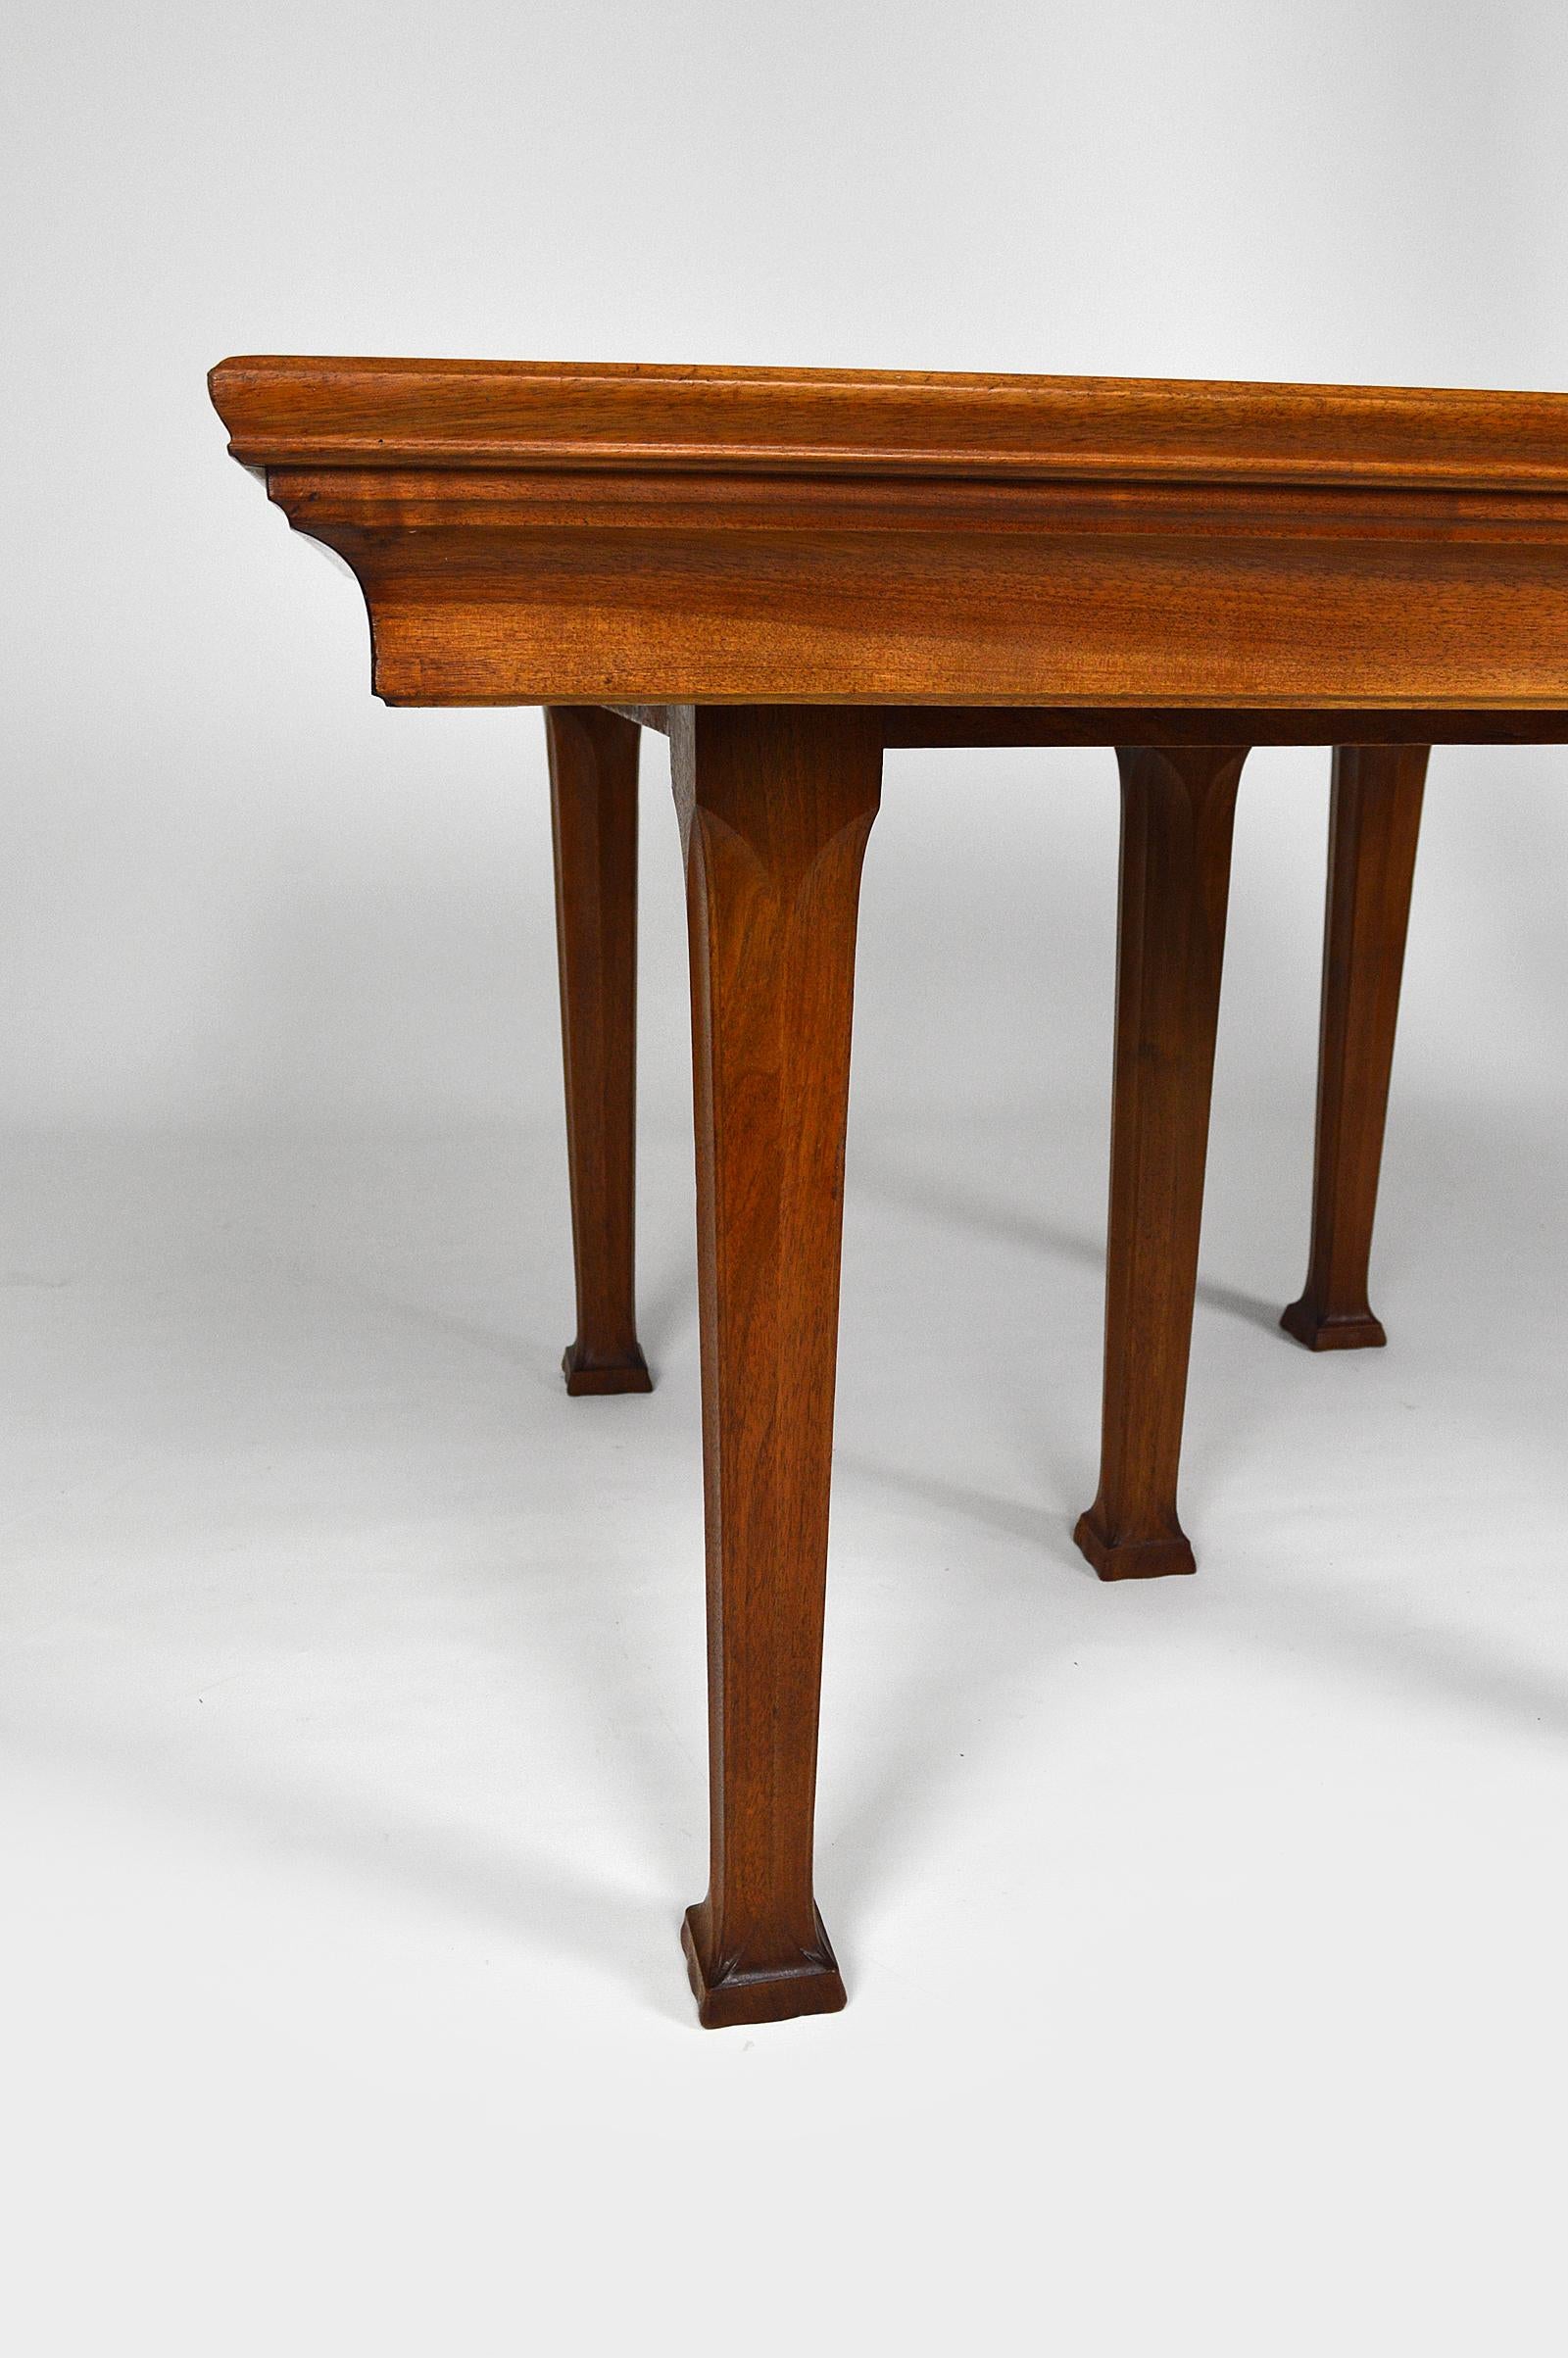 Early 20th Century Art Nouveau 5-Legged Dining Table in Walnut by G.E.Nowak, France, circa 1905